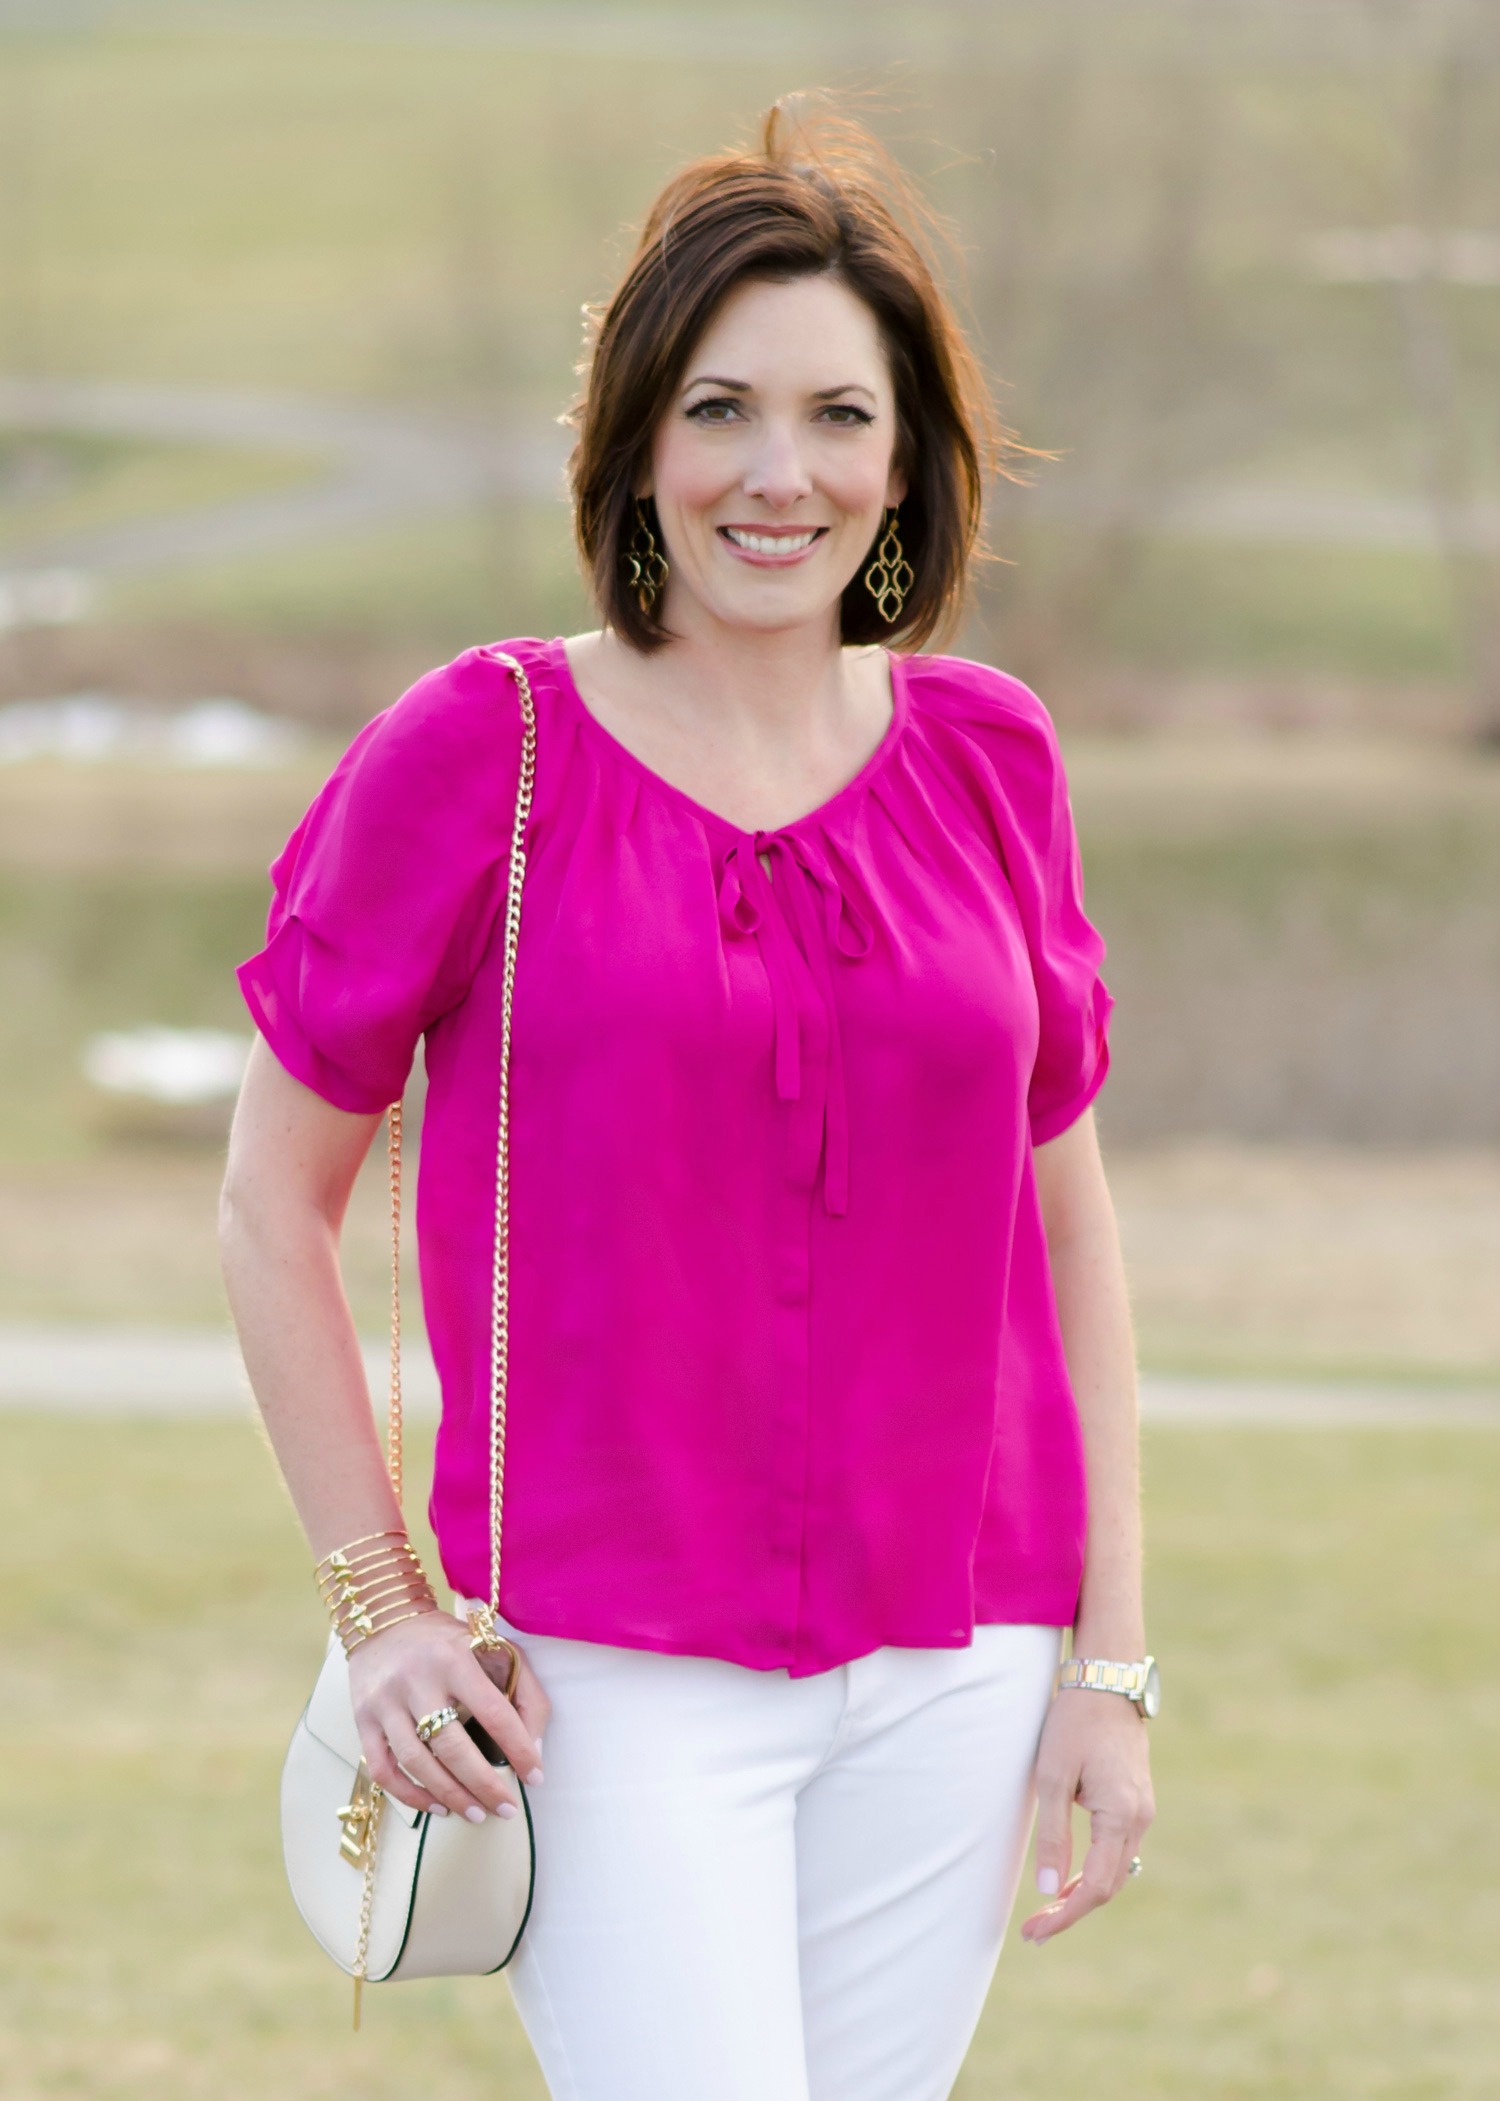 Fashion Over 40 | Spring Outfit Inspiration: Pink Joie Blouse, White Jeans DL1961 Florence, Nude Pumps, Pact Pumps, White Twist Lock Shoulder Bag, Chloe Drew Look-Alike